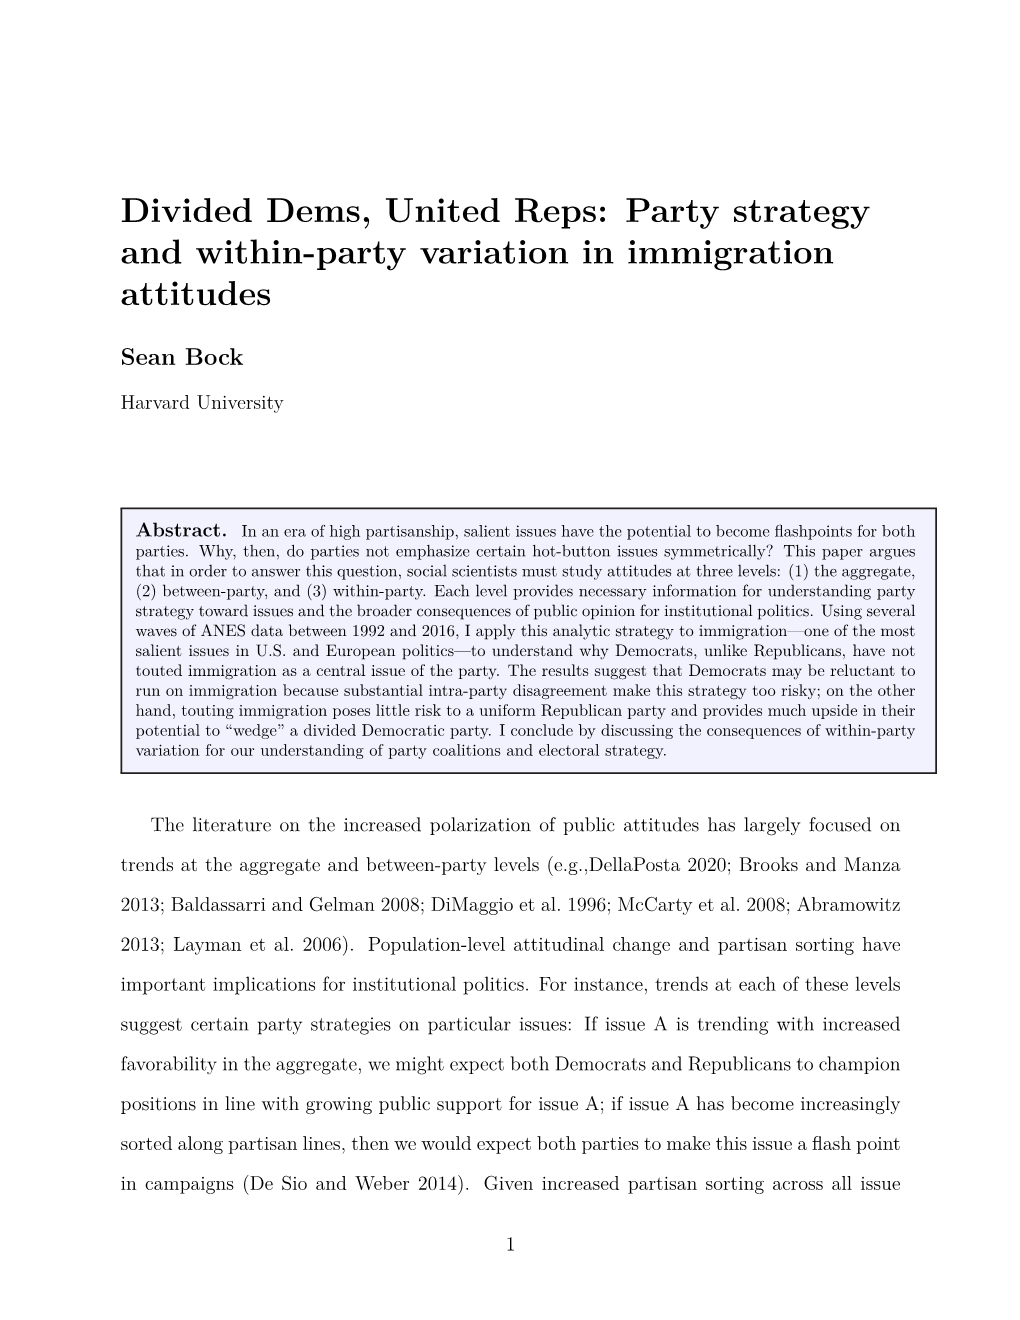 Party Strategy and Within-Party Variation in Immigration Attitudes